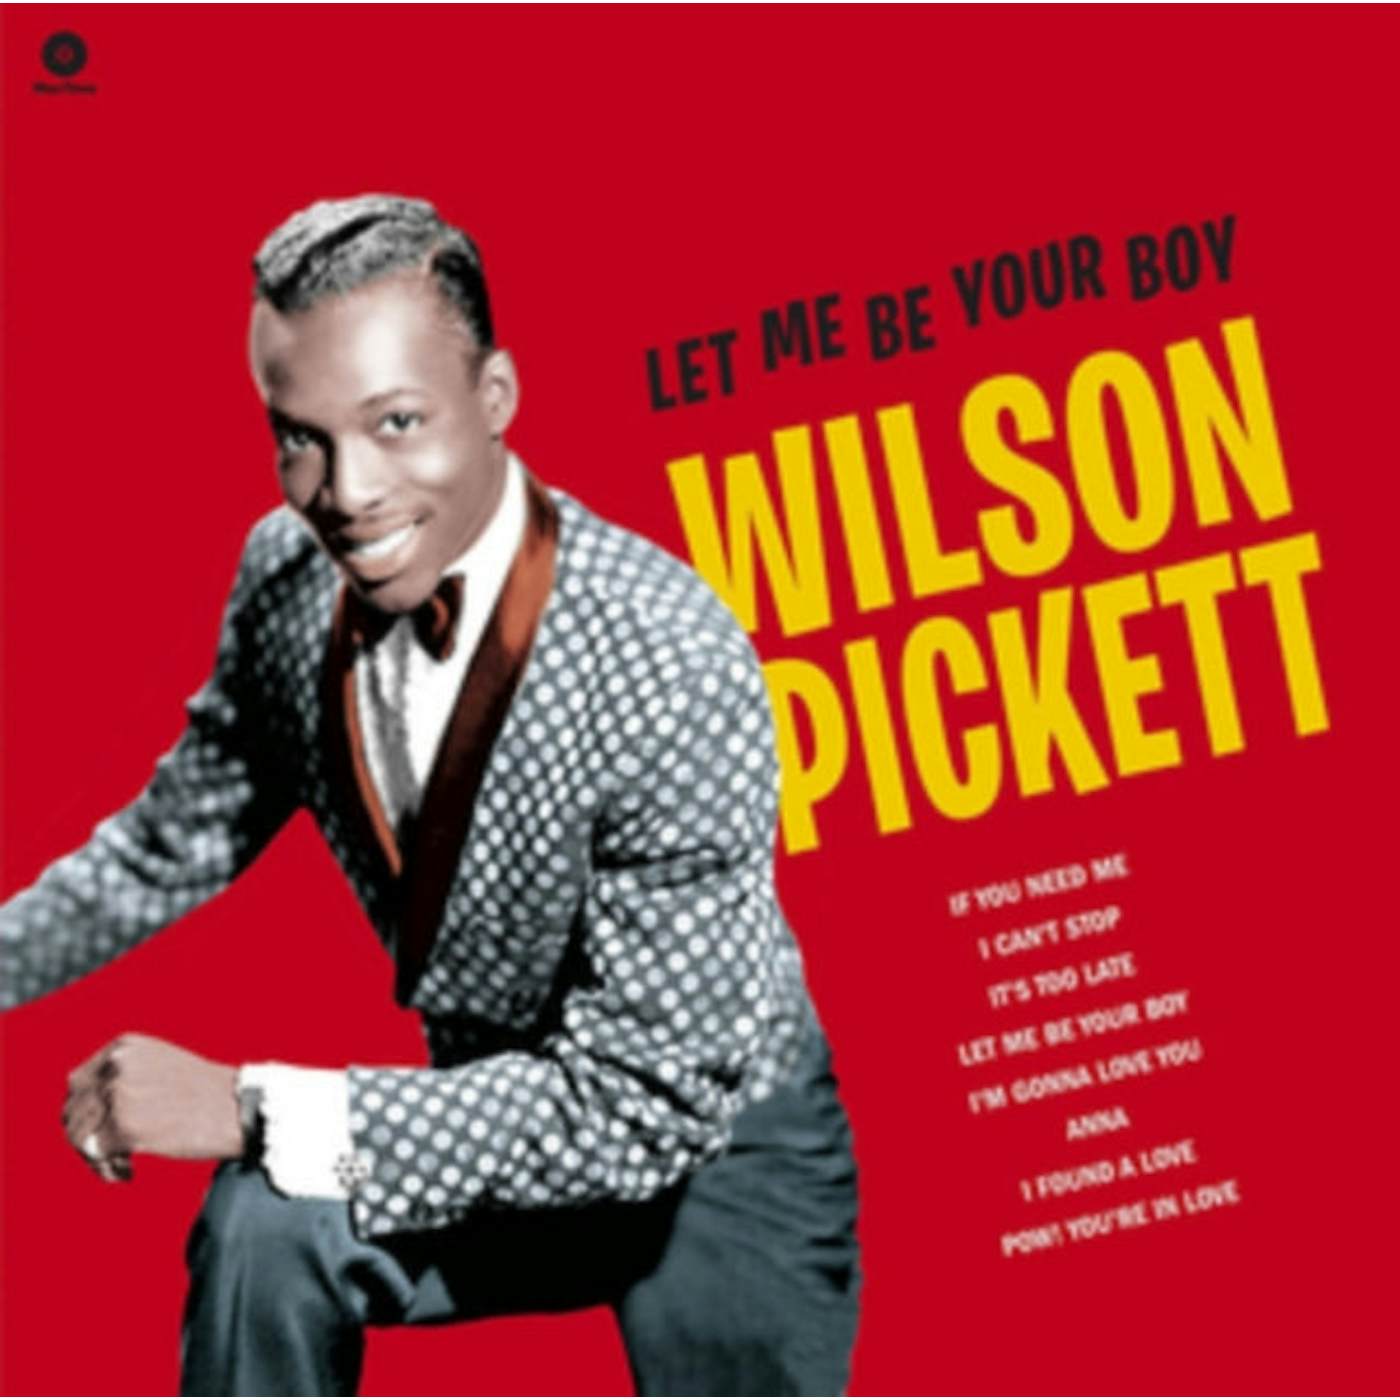 Wilson Pickett LP Vinyl Record - Let Me Be Your Boy - The Early Years. 19 59-19 62